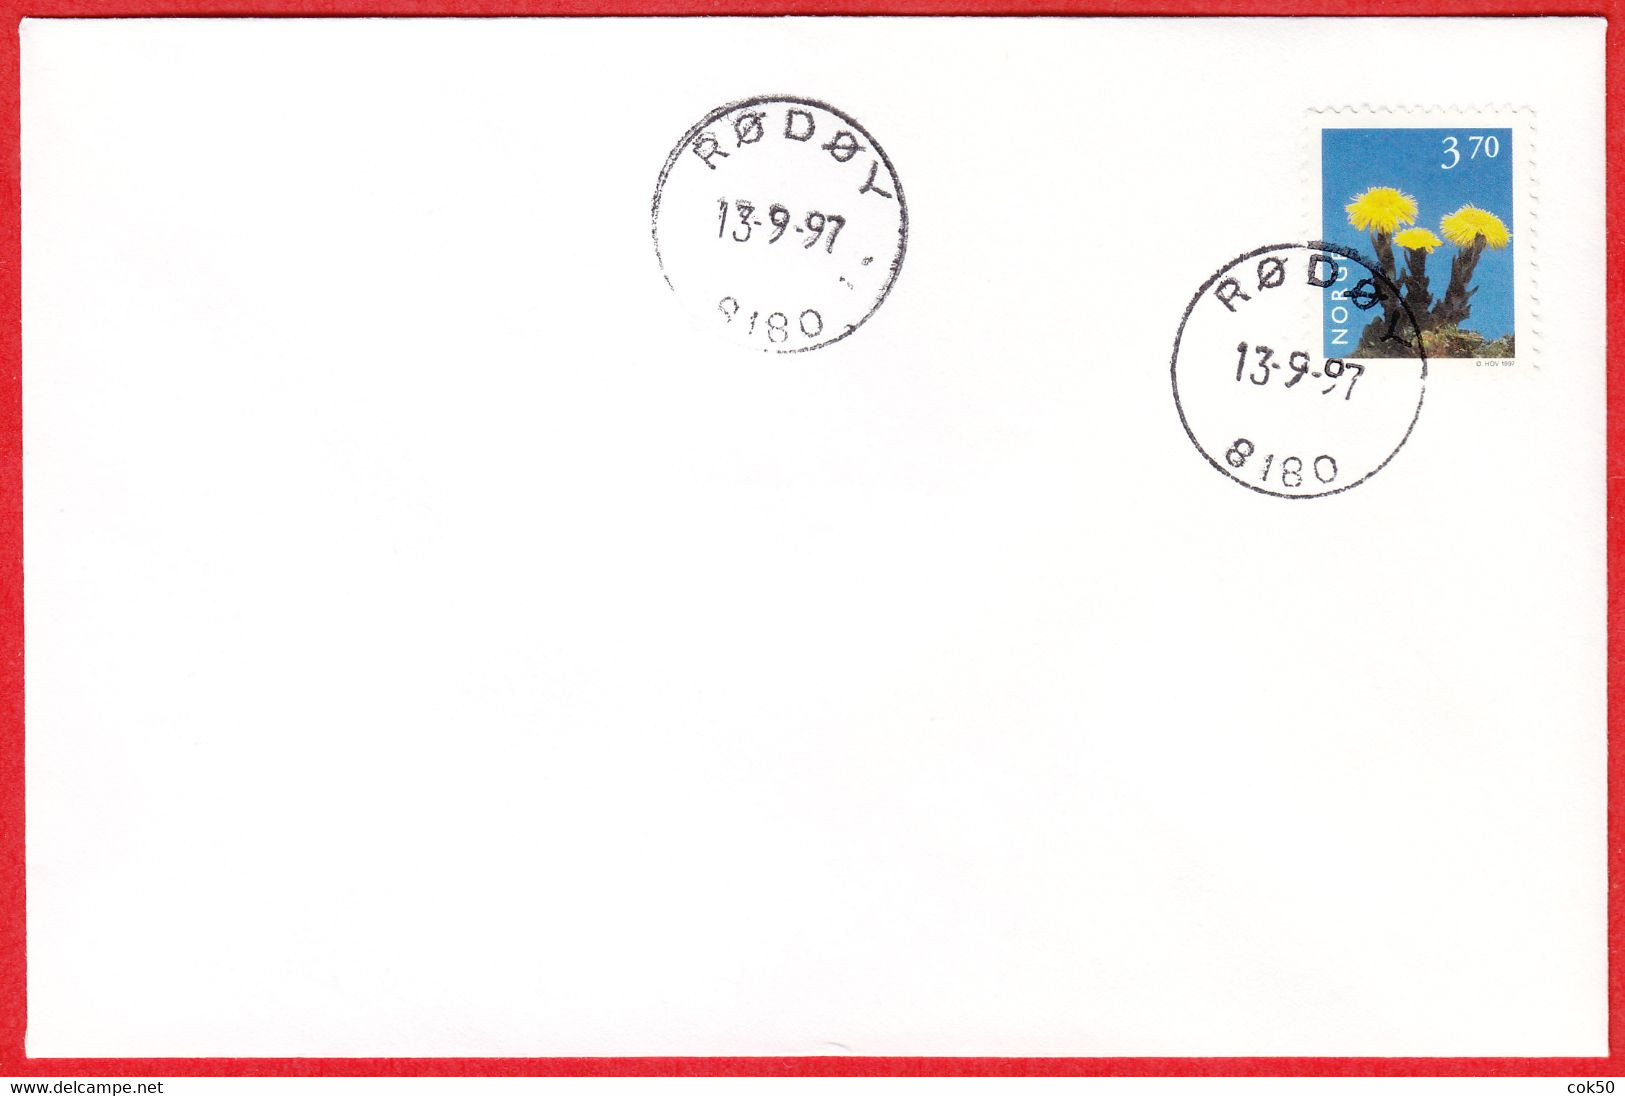 NORWAY -  8180 RØDØY - (Nordland County) - Last Day/postoffice Closed On 1997.09.13 - Local Post Stamps